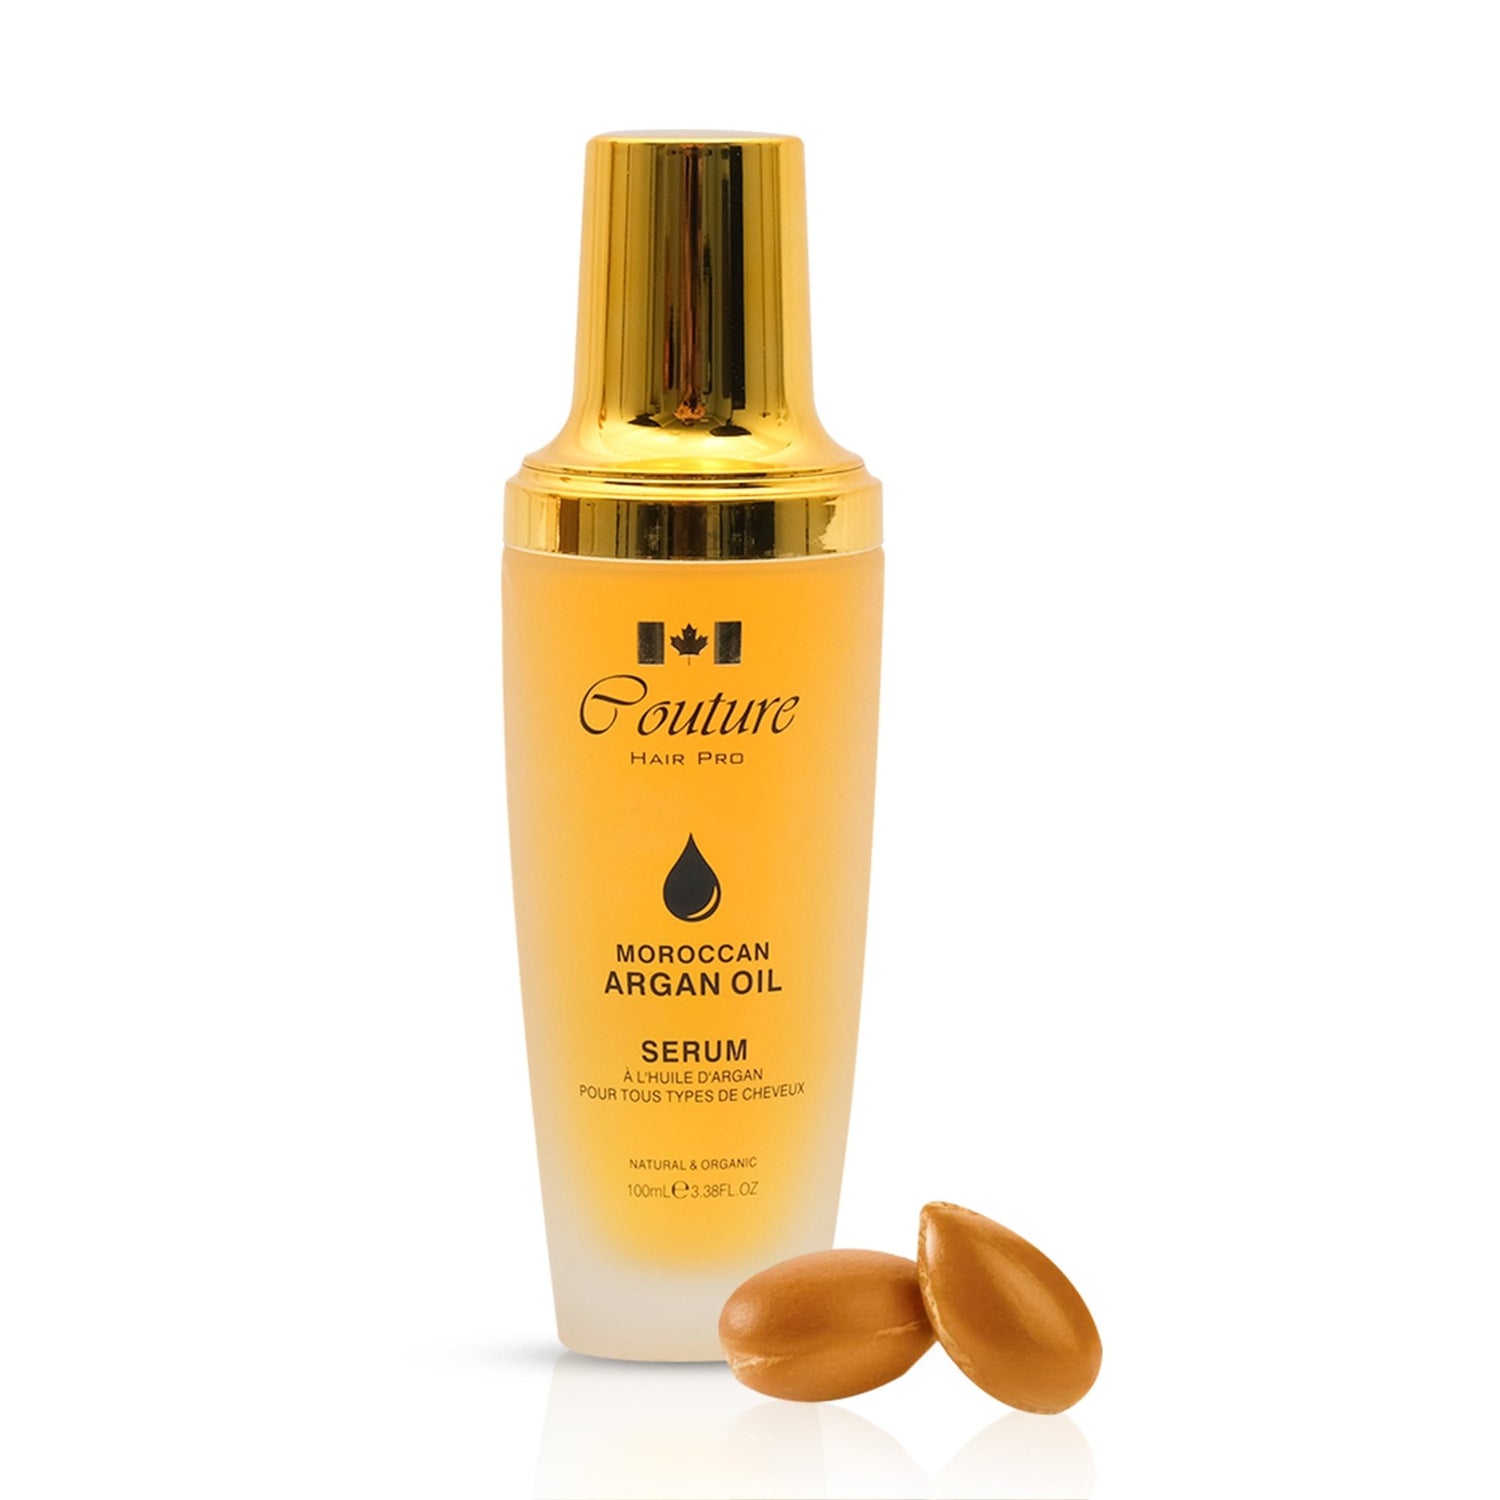 Couture Hair Pro Moroccan Argan Oil - Best Hair Oil - #1 Selling Hair Tools Brand in the Middle East - Couture Hair Pro